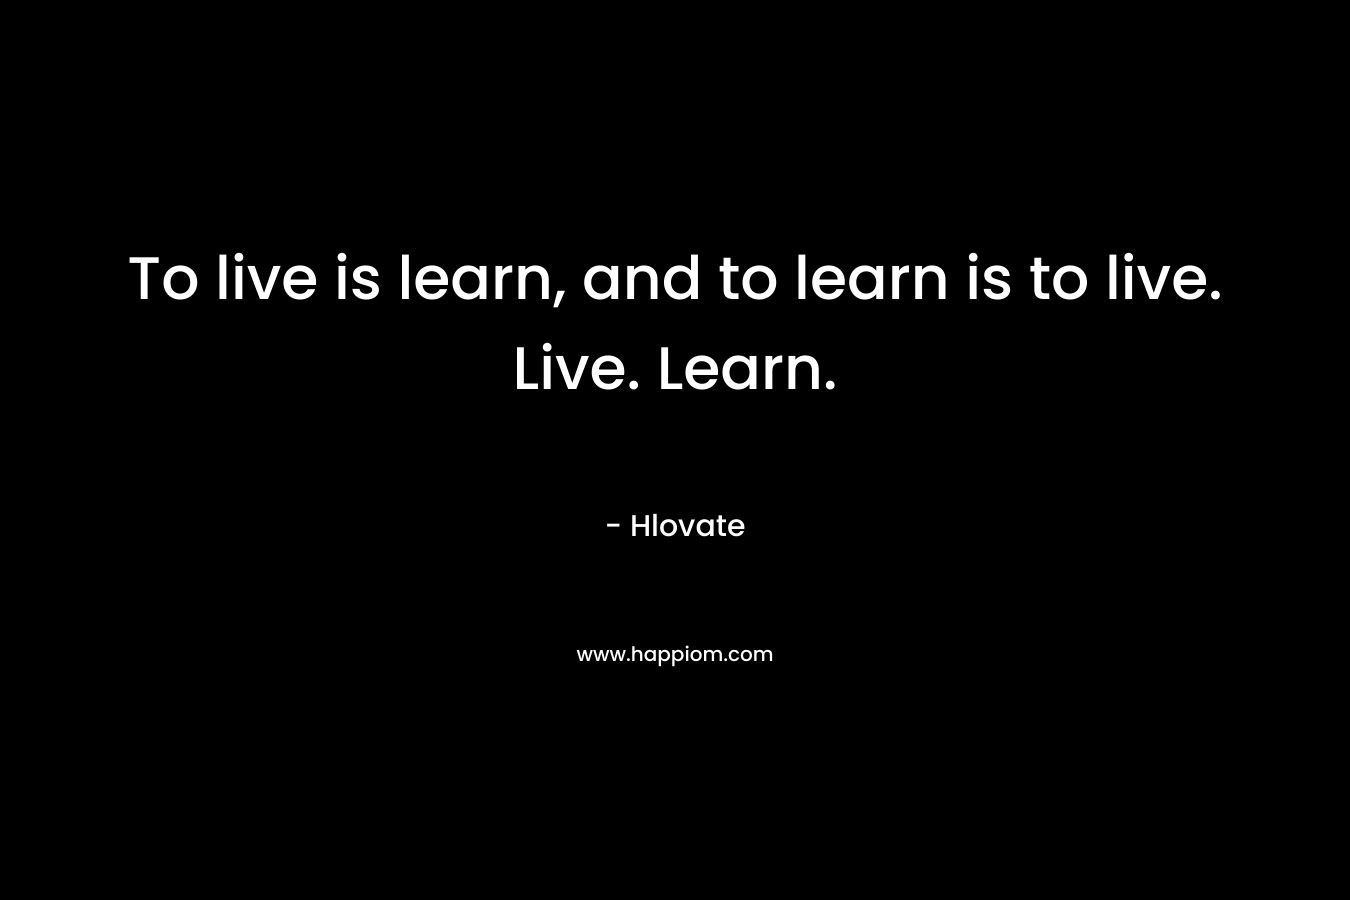 To live is learn, and to learn is to live. Live. Learn.